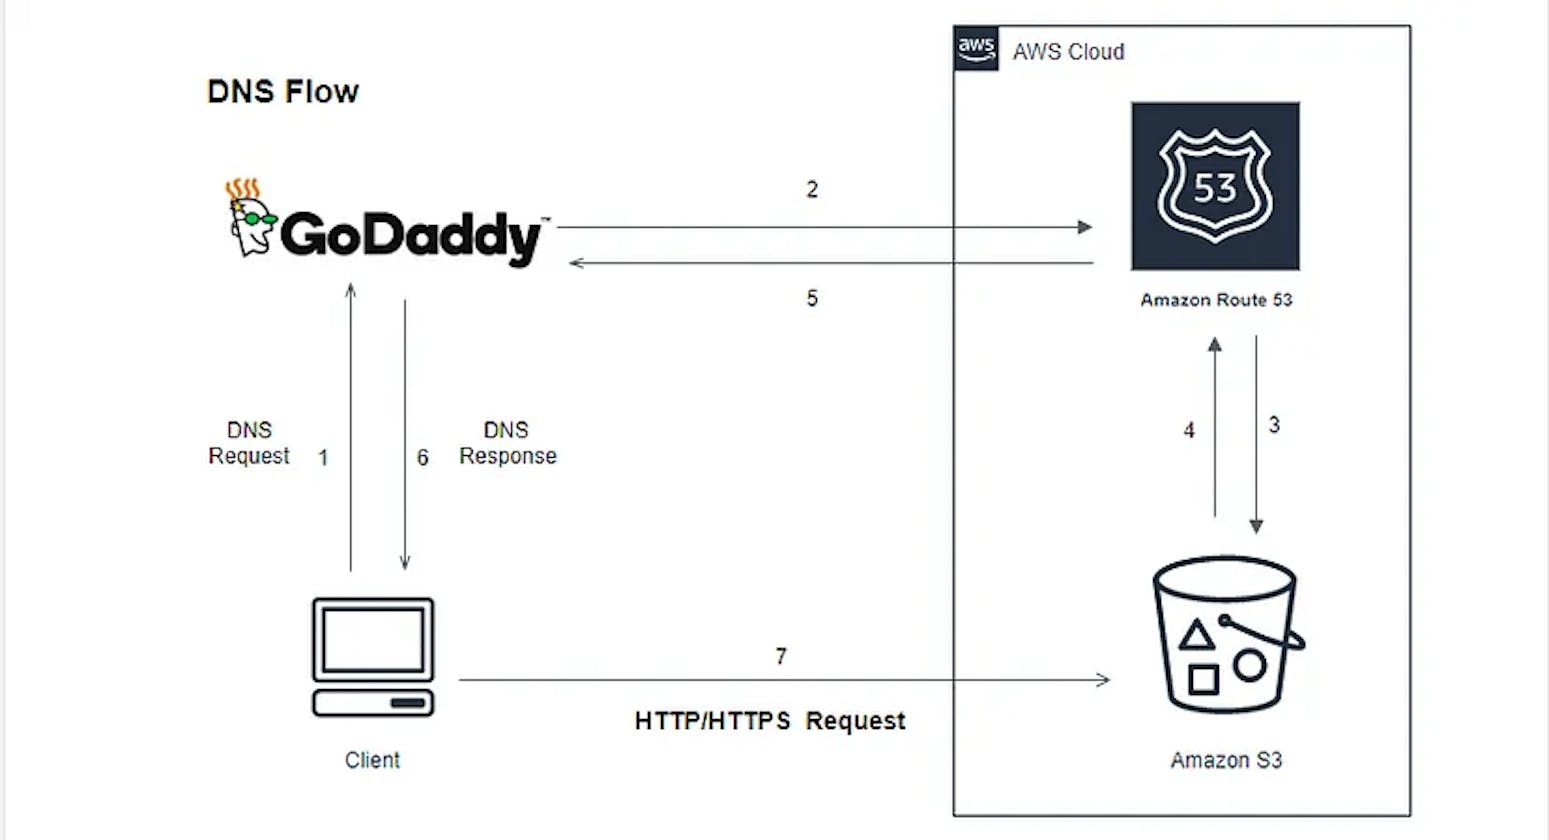 AWS:Hosting a static website on Amazon S3 and using Route 53 for DNS with a GoDaddy